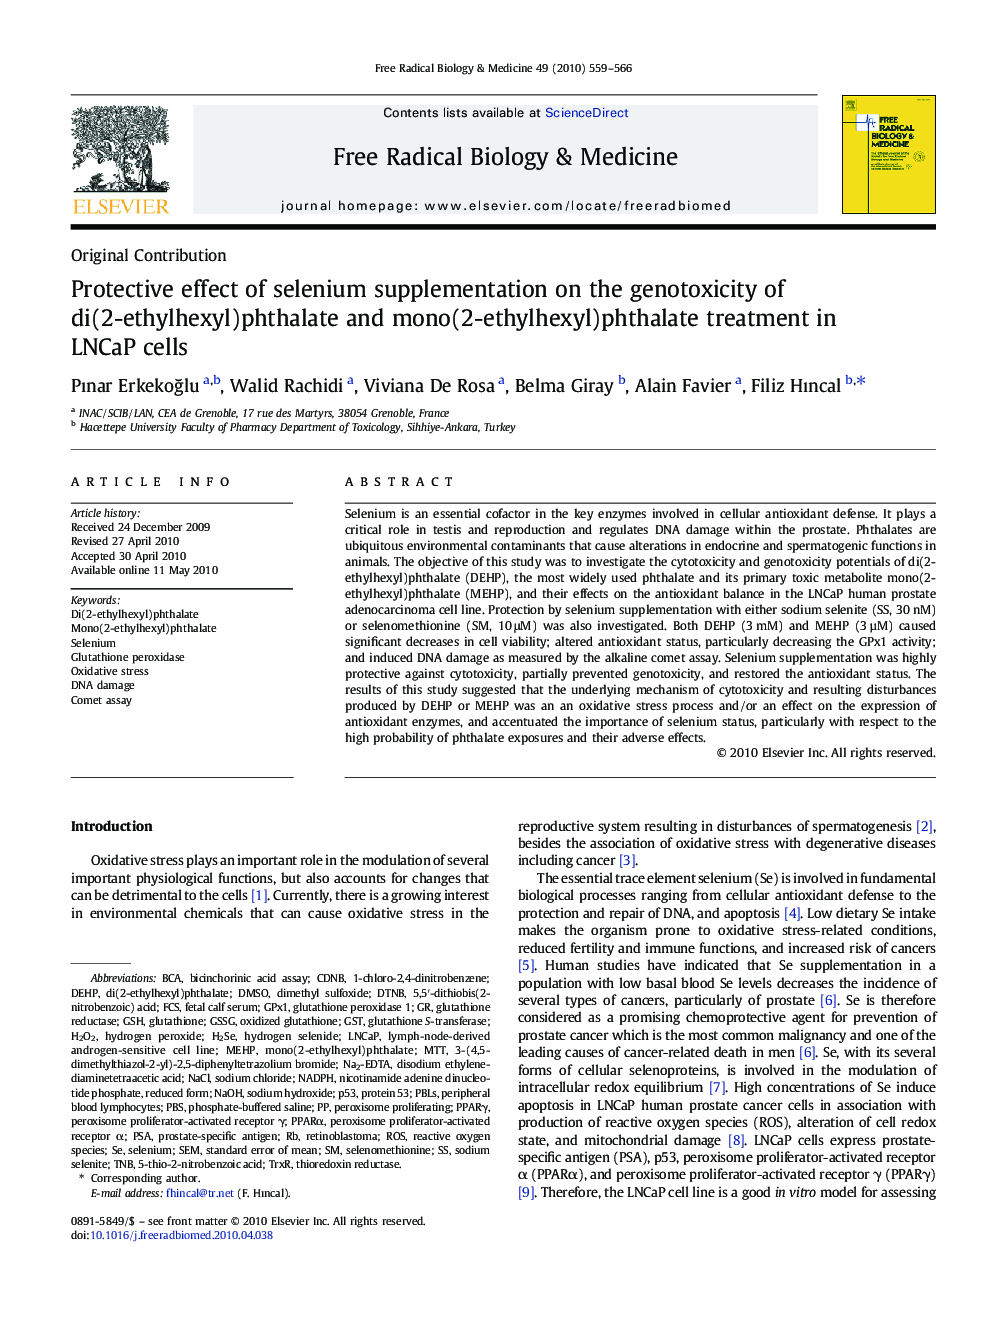 Protective effect of selenium supplementation on the genotoxicity of di(2-ethylhexyl)phthalate and mono(2-ethylhexyl)phthalate treatment in LNCaP cells